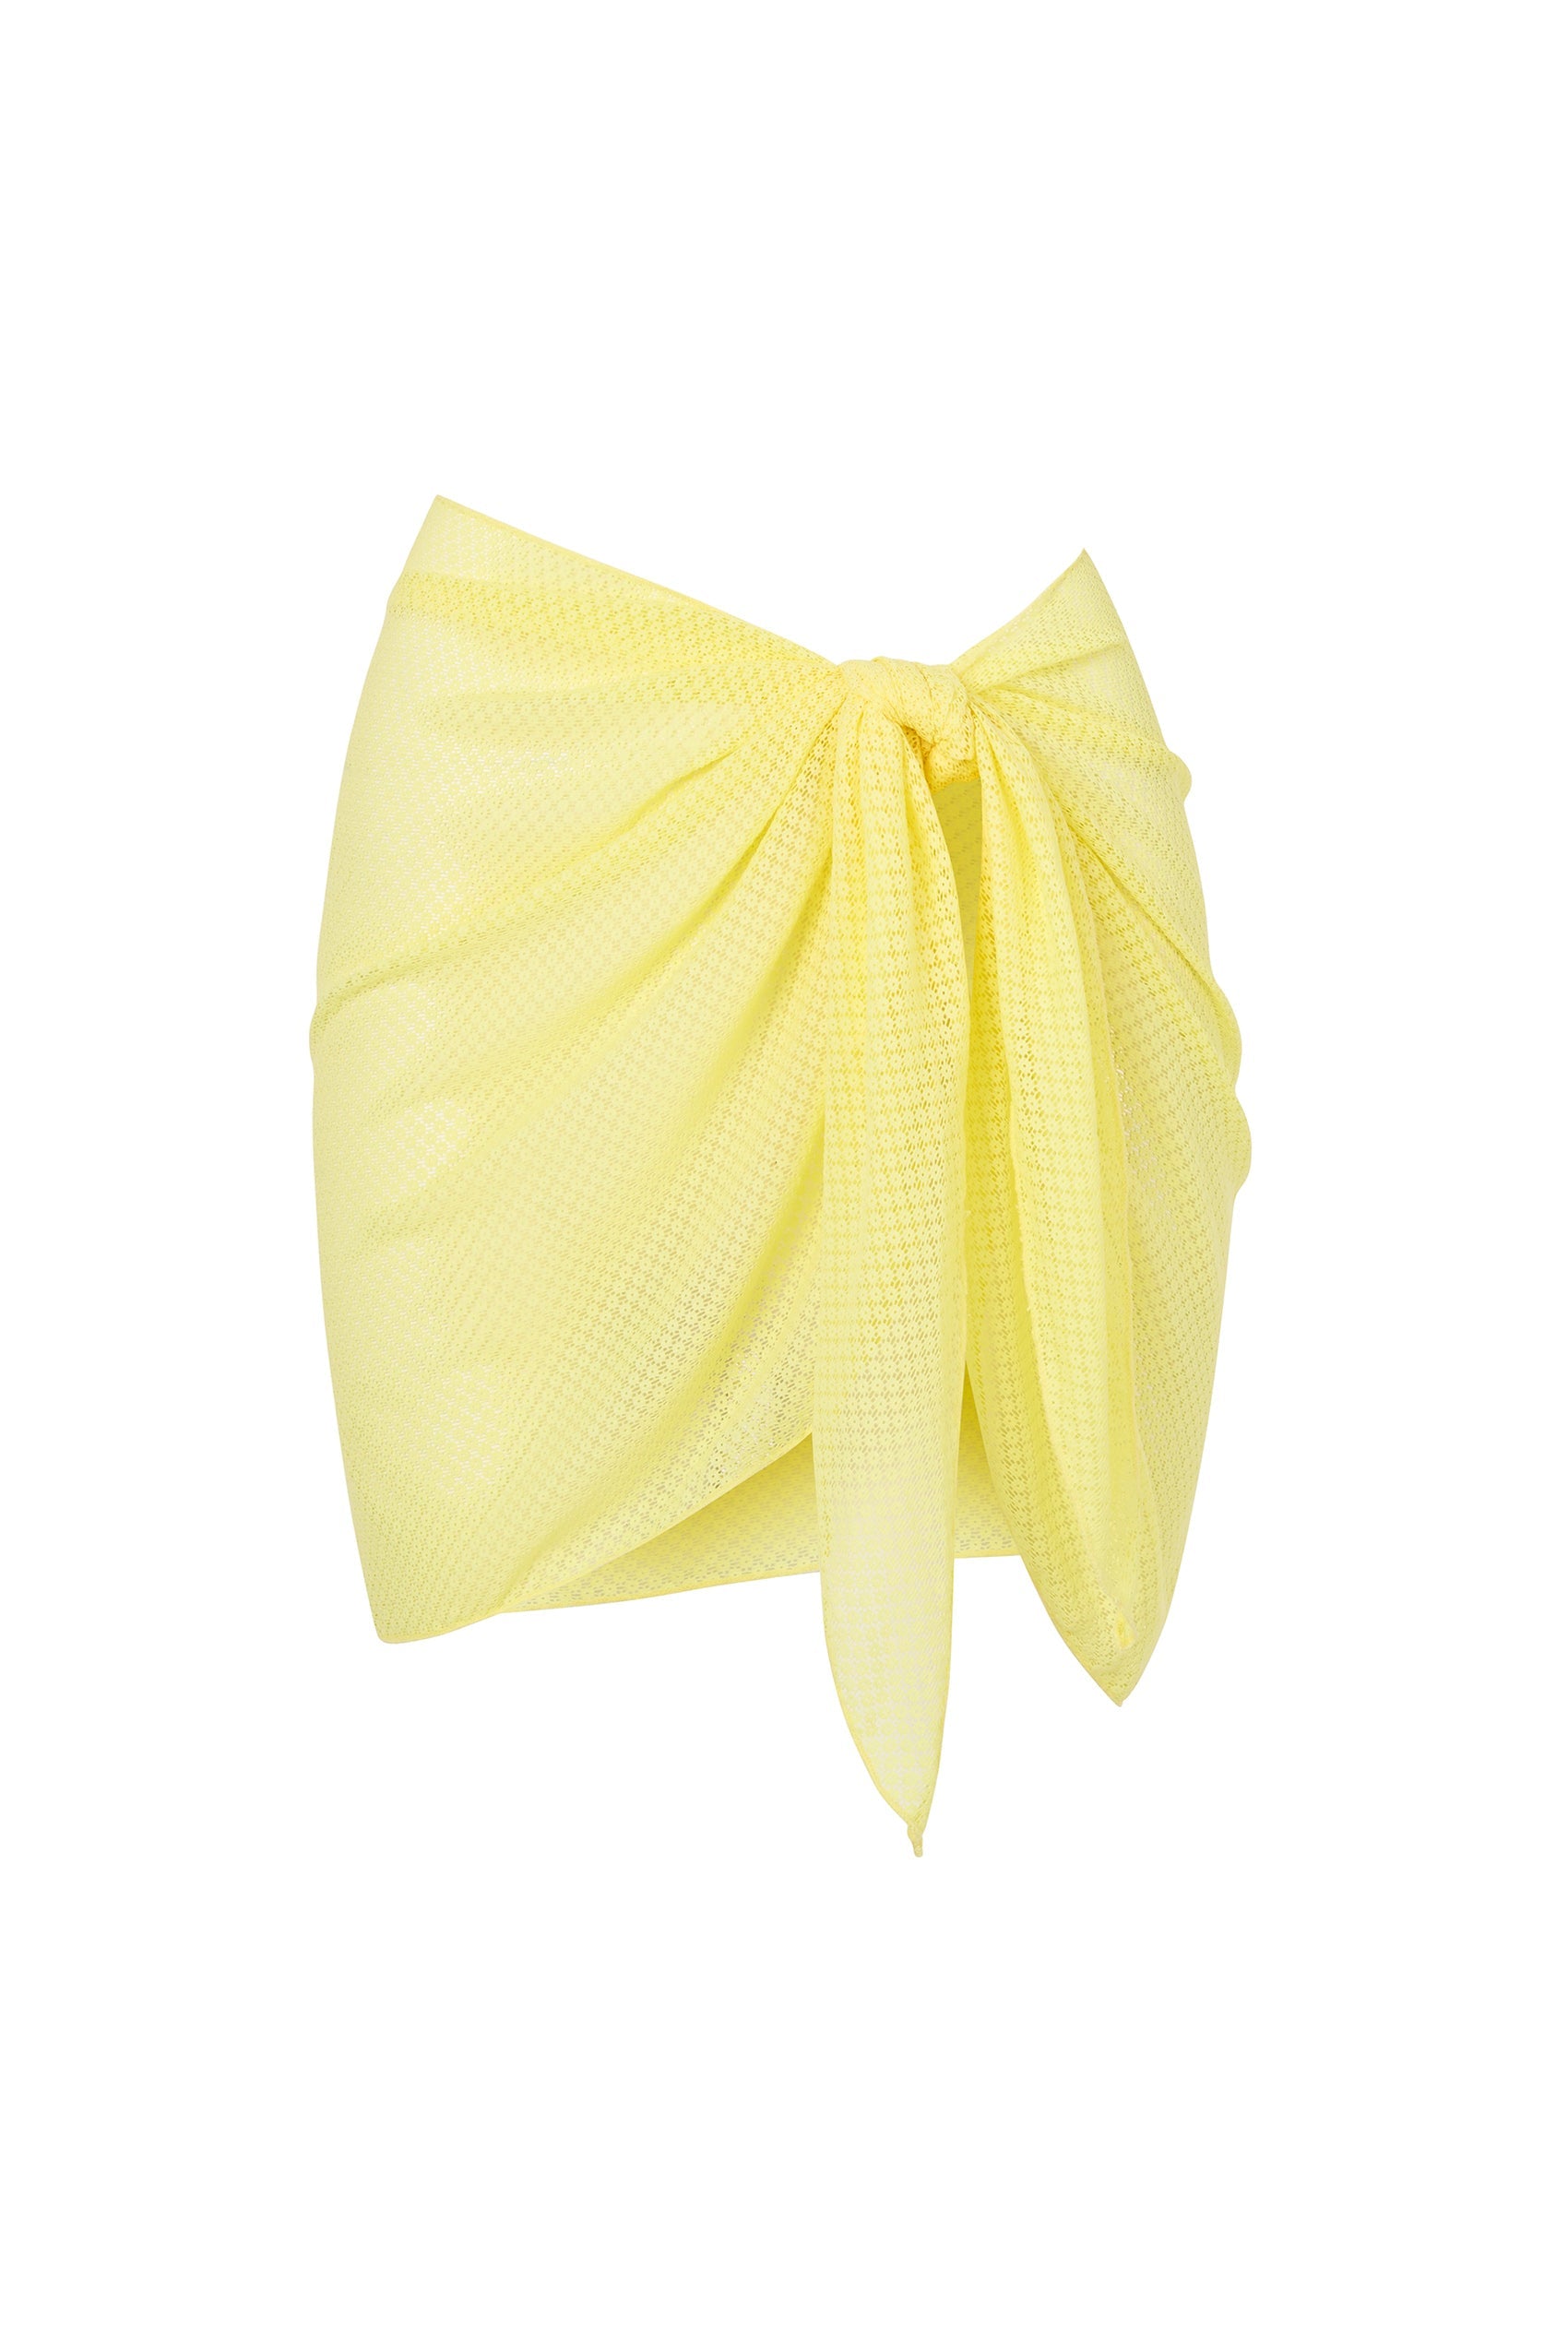 Sarong in Limon